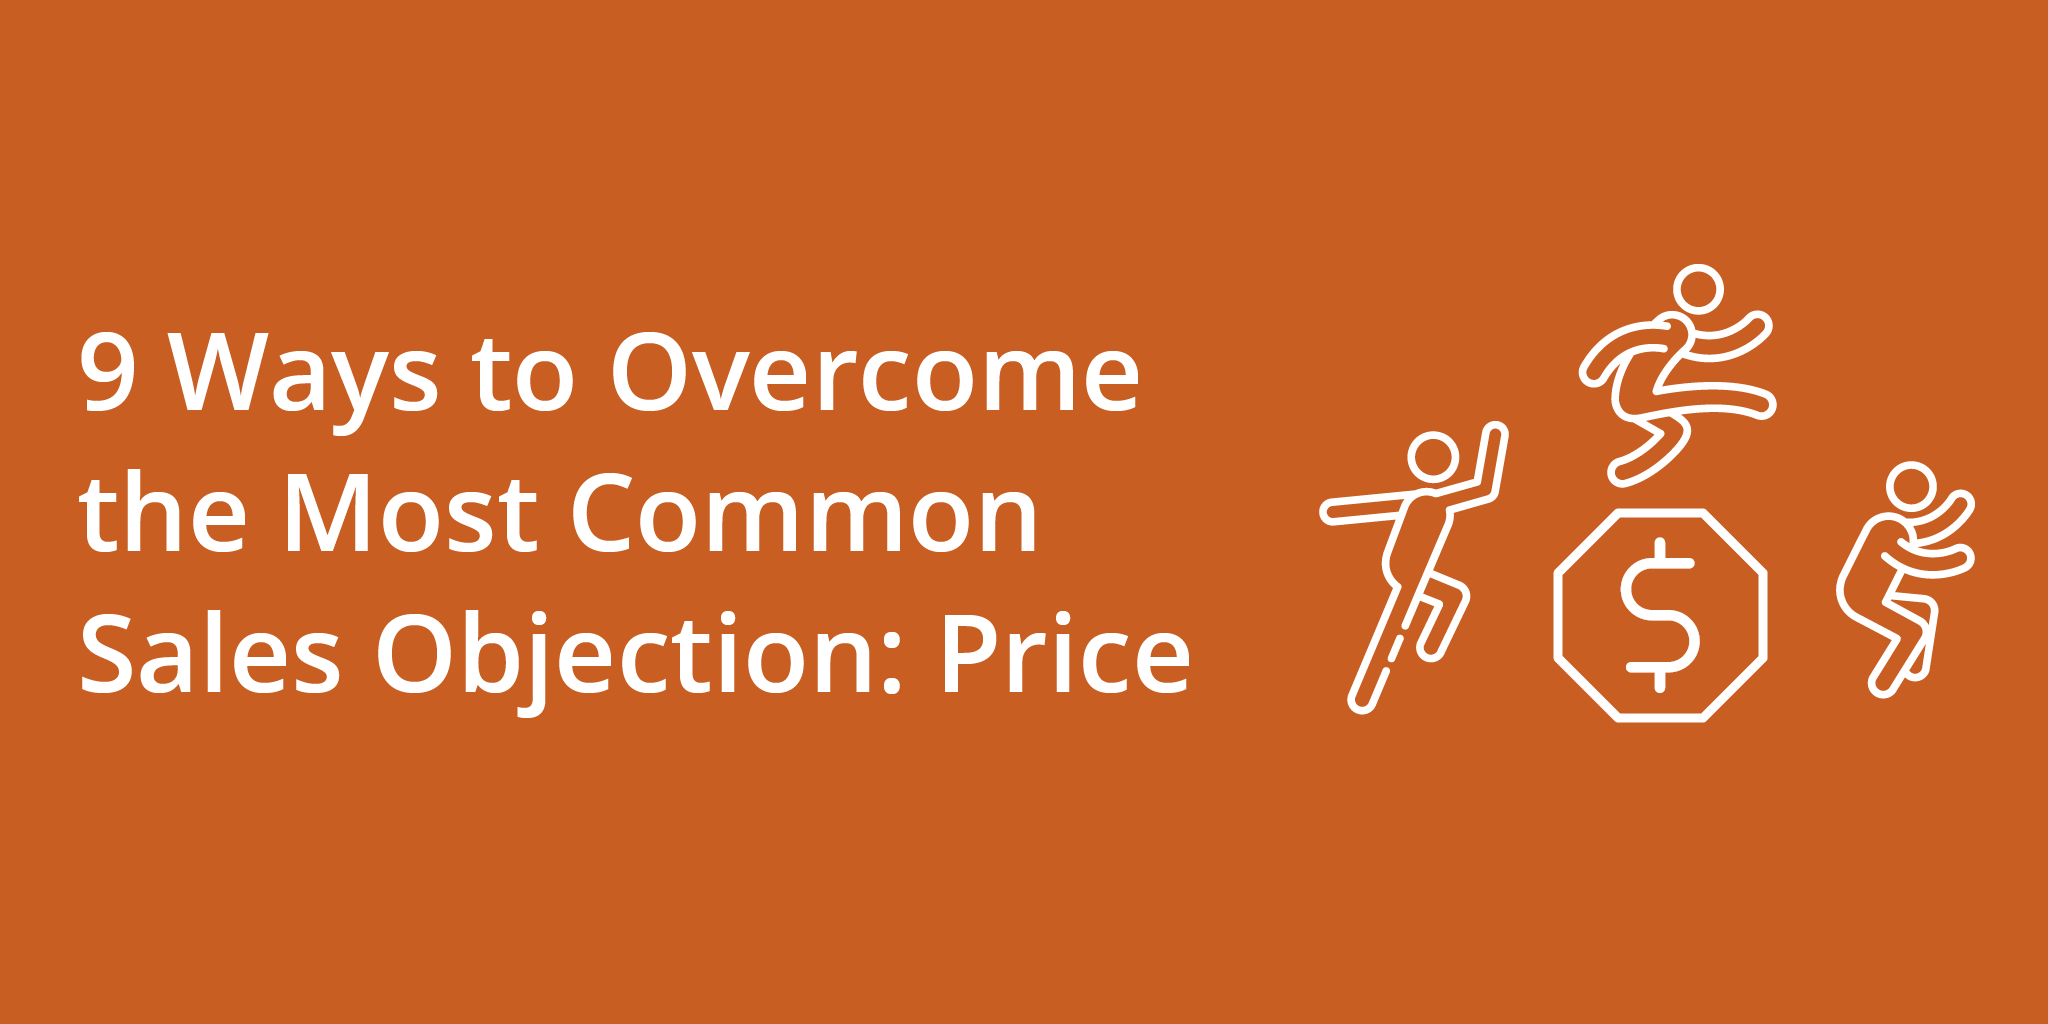 9 Ways to Overcome the Most Common Sales Objection: Price | Telephones for business